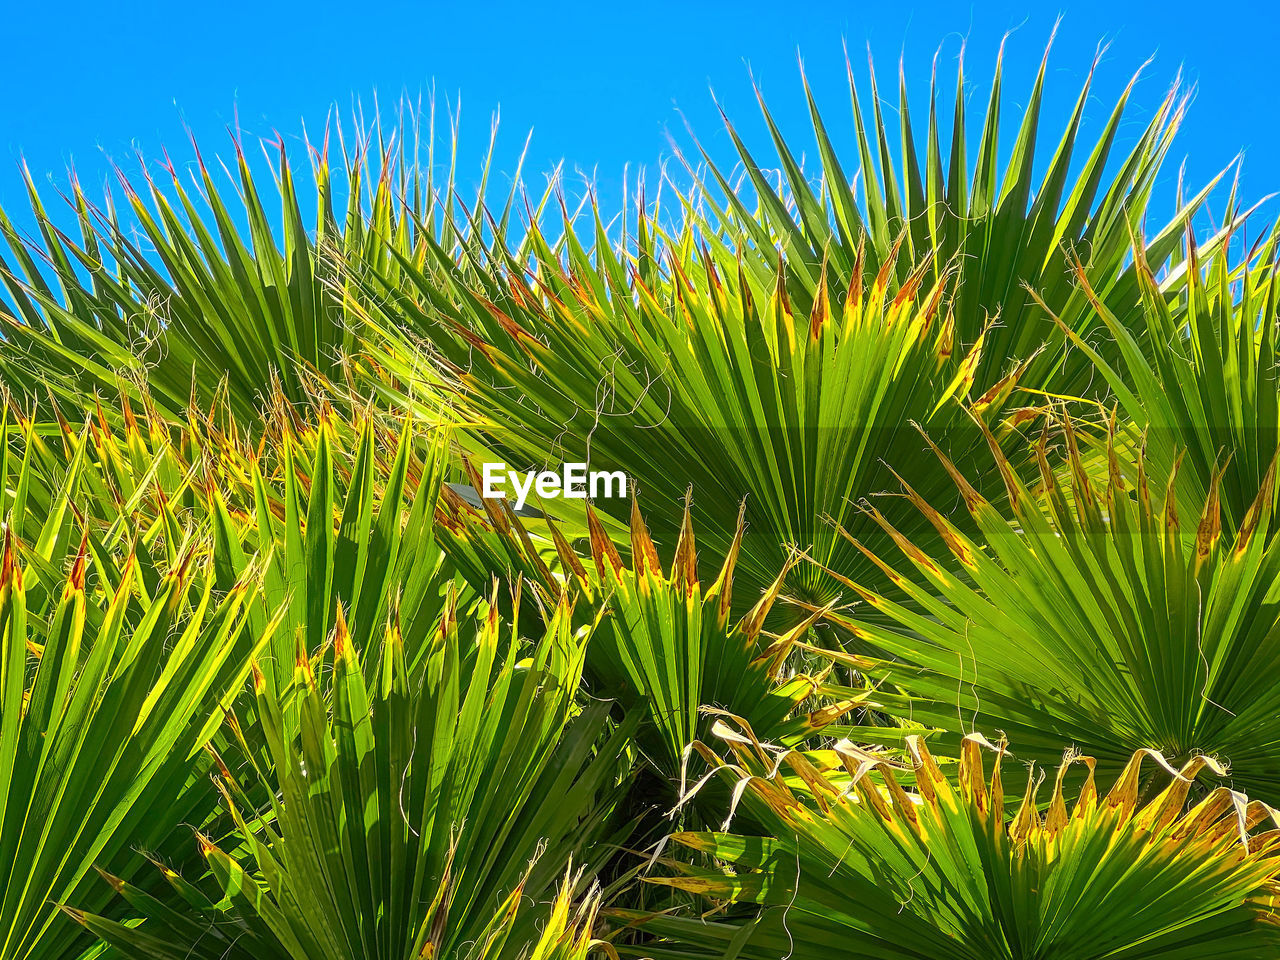 plant, grass, vegetation, growth, green, nature, palm tree, beauty in nature, sky, leaf, tree, flower, tropical climate, land, no people, saw palmetto, palm leaf, plant part, sunlight, field, environment, clear sky, outdoors, day, tranquility, freshness, tropics, blue, close-up, lawn, agriculture, sunny, landscape, summer, scenics - nature, botany